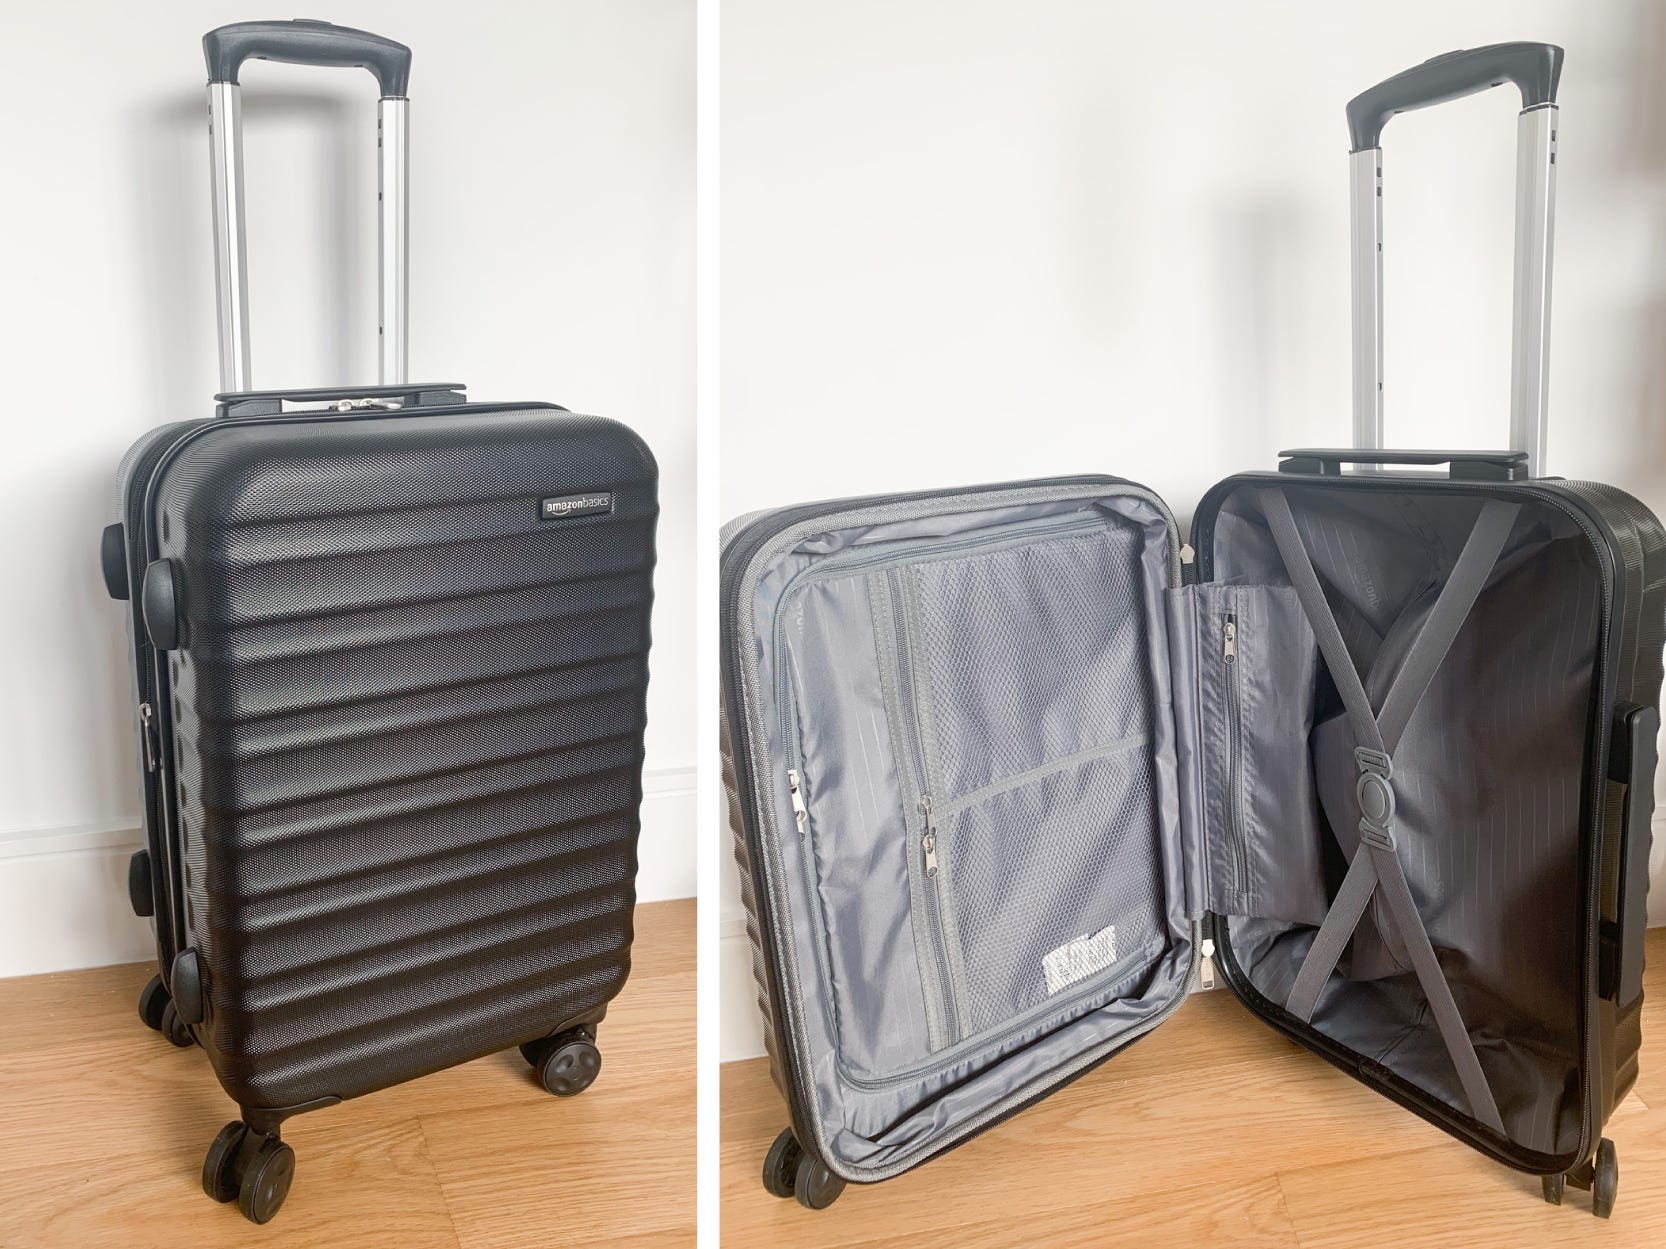 Best carry-on luggage - amazonbasics side by side